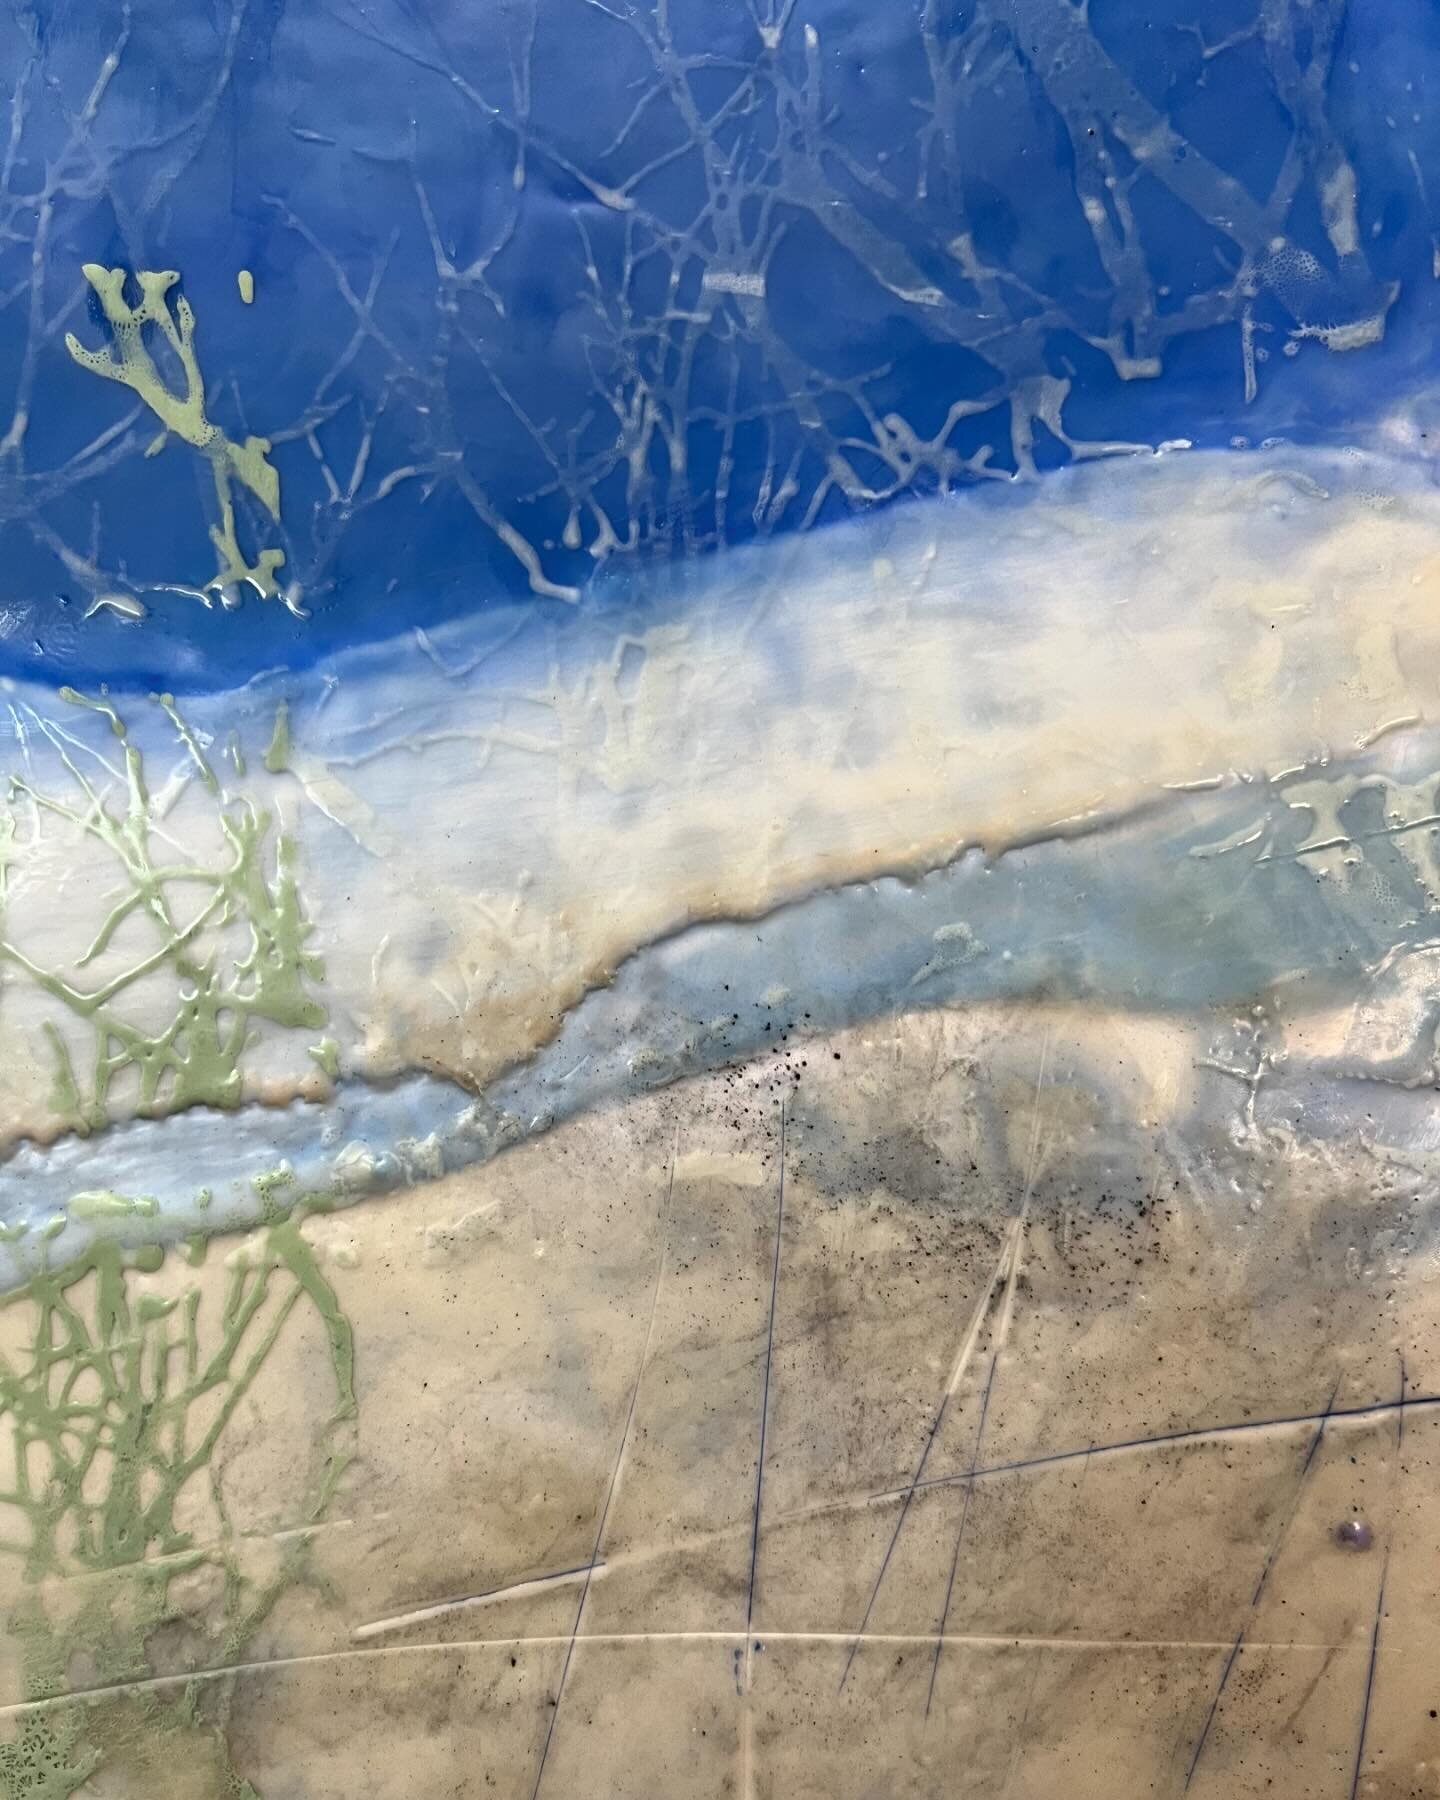 A couple more details from a new painting. I&rsquo;m finally satisfied after a few tweaks. The idea of the water&rsquo;s edge intrigues me as a place of mystery.#encausticpainting #encausticmixedmedia #abstractlandscape #earthbased #watersedge #chica